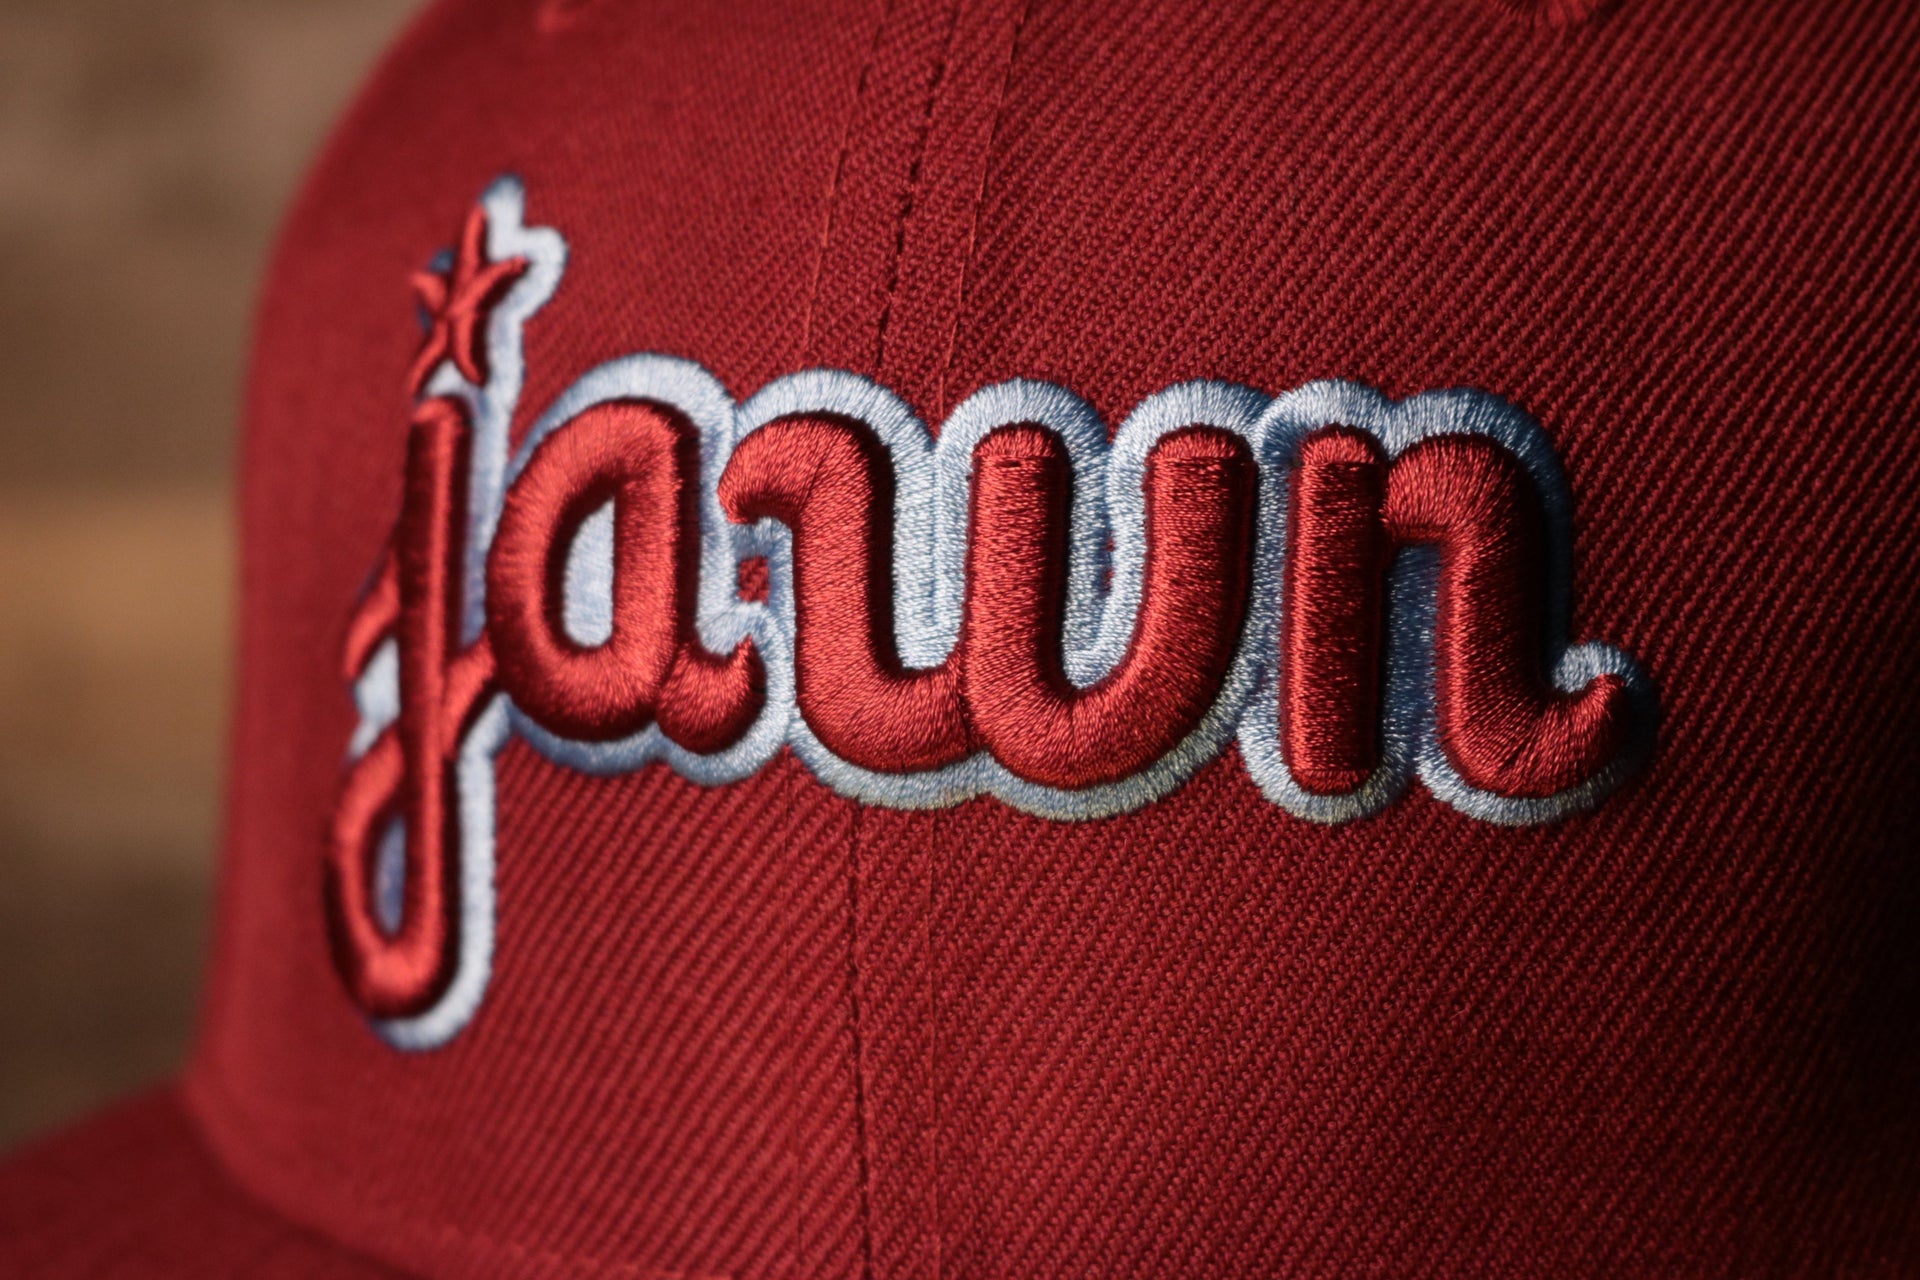 the word jawn is in burgundy and light blue for the phillies retro colors Grey Bottom Fitted Cap | Jawn Burgundy Gray Bottom Fitted Hat